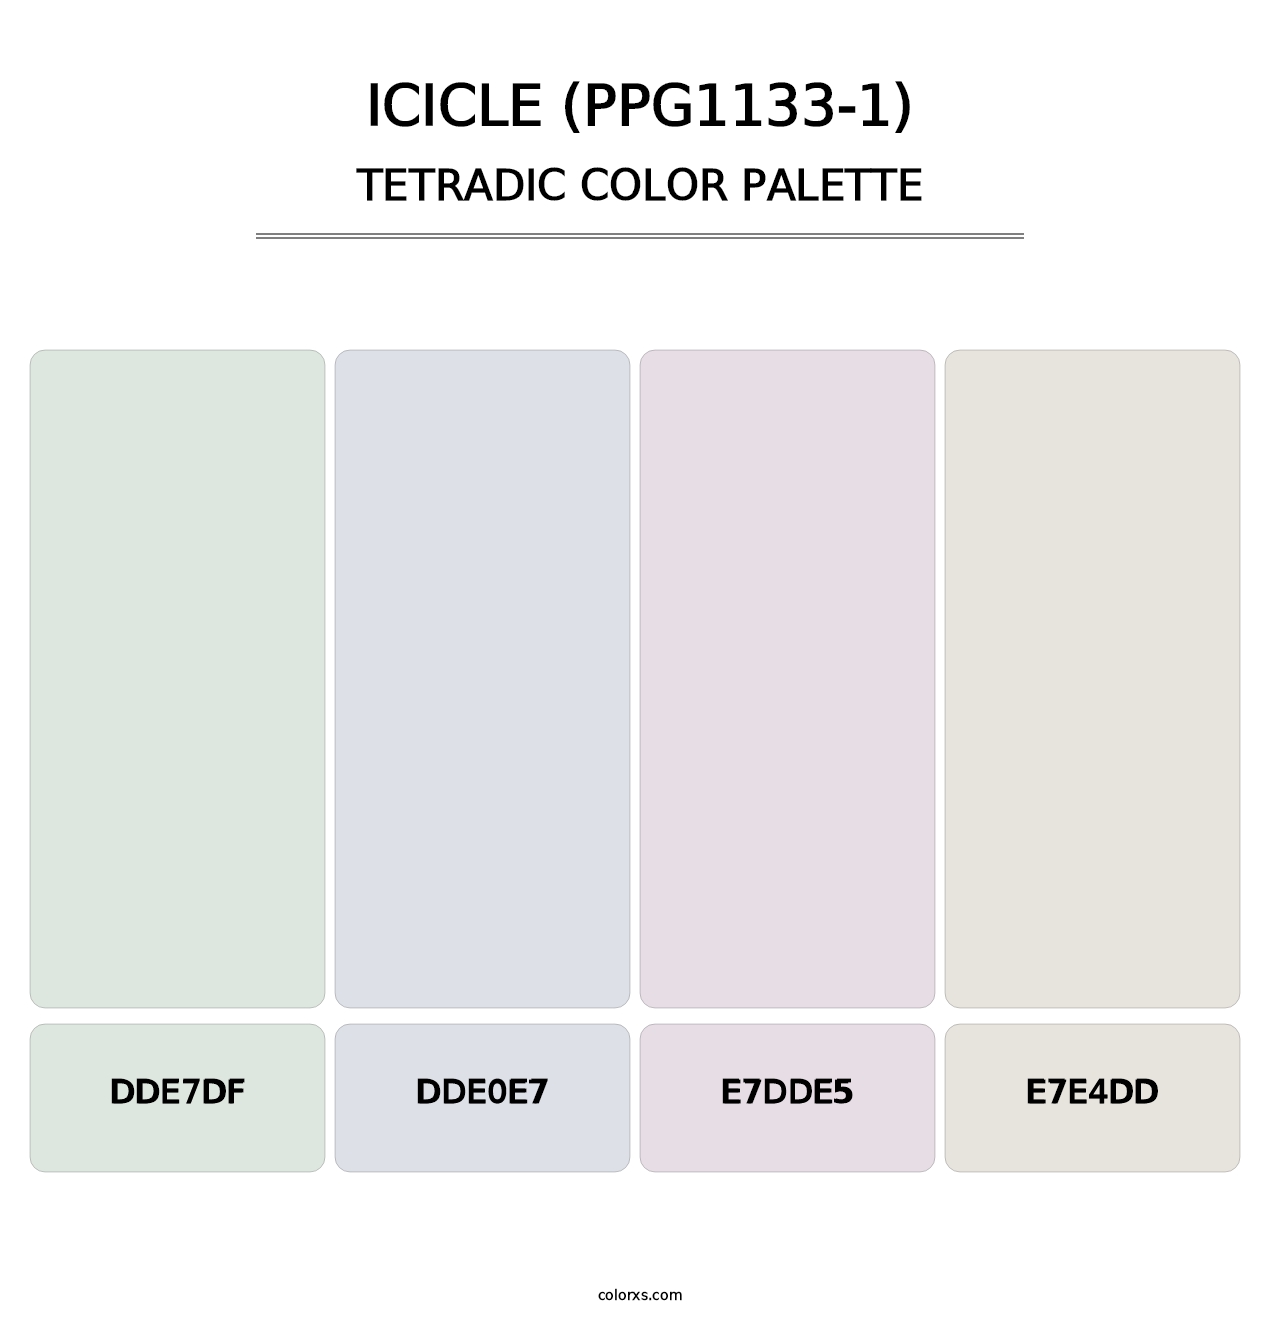 Icicle (PPG1133-1) - Tetradic Color Palette